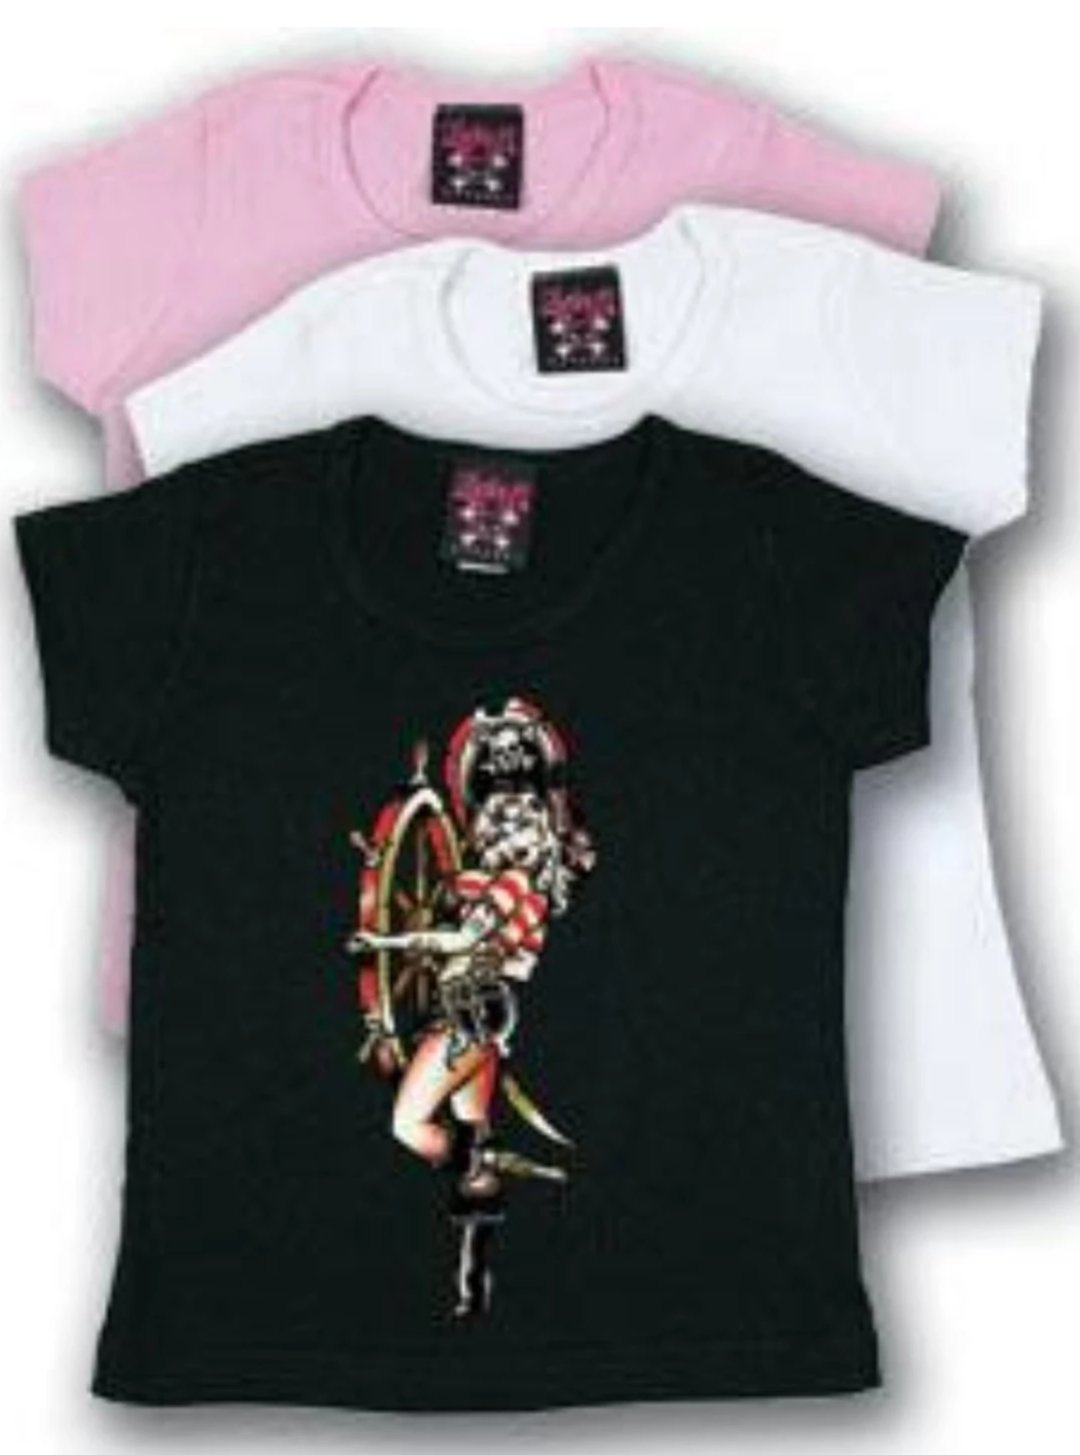 The PIRATE GIRL Toddler Tee - LIMITED QUANTITIES AND SIZES AVAILABLE